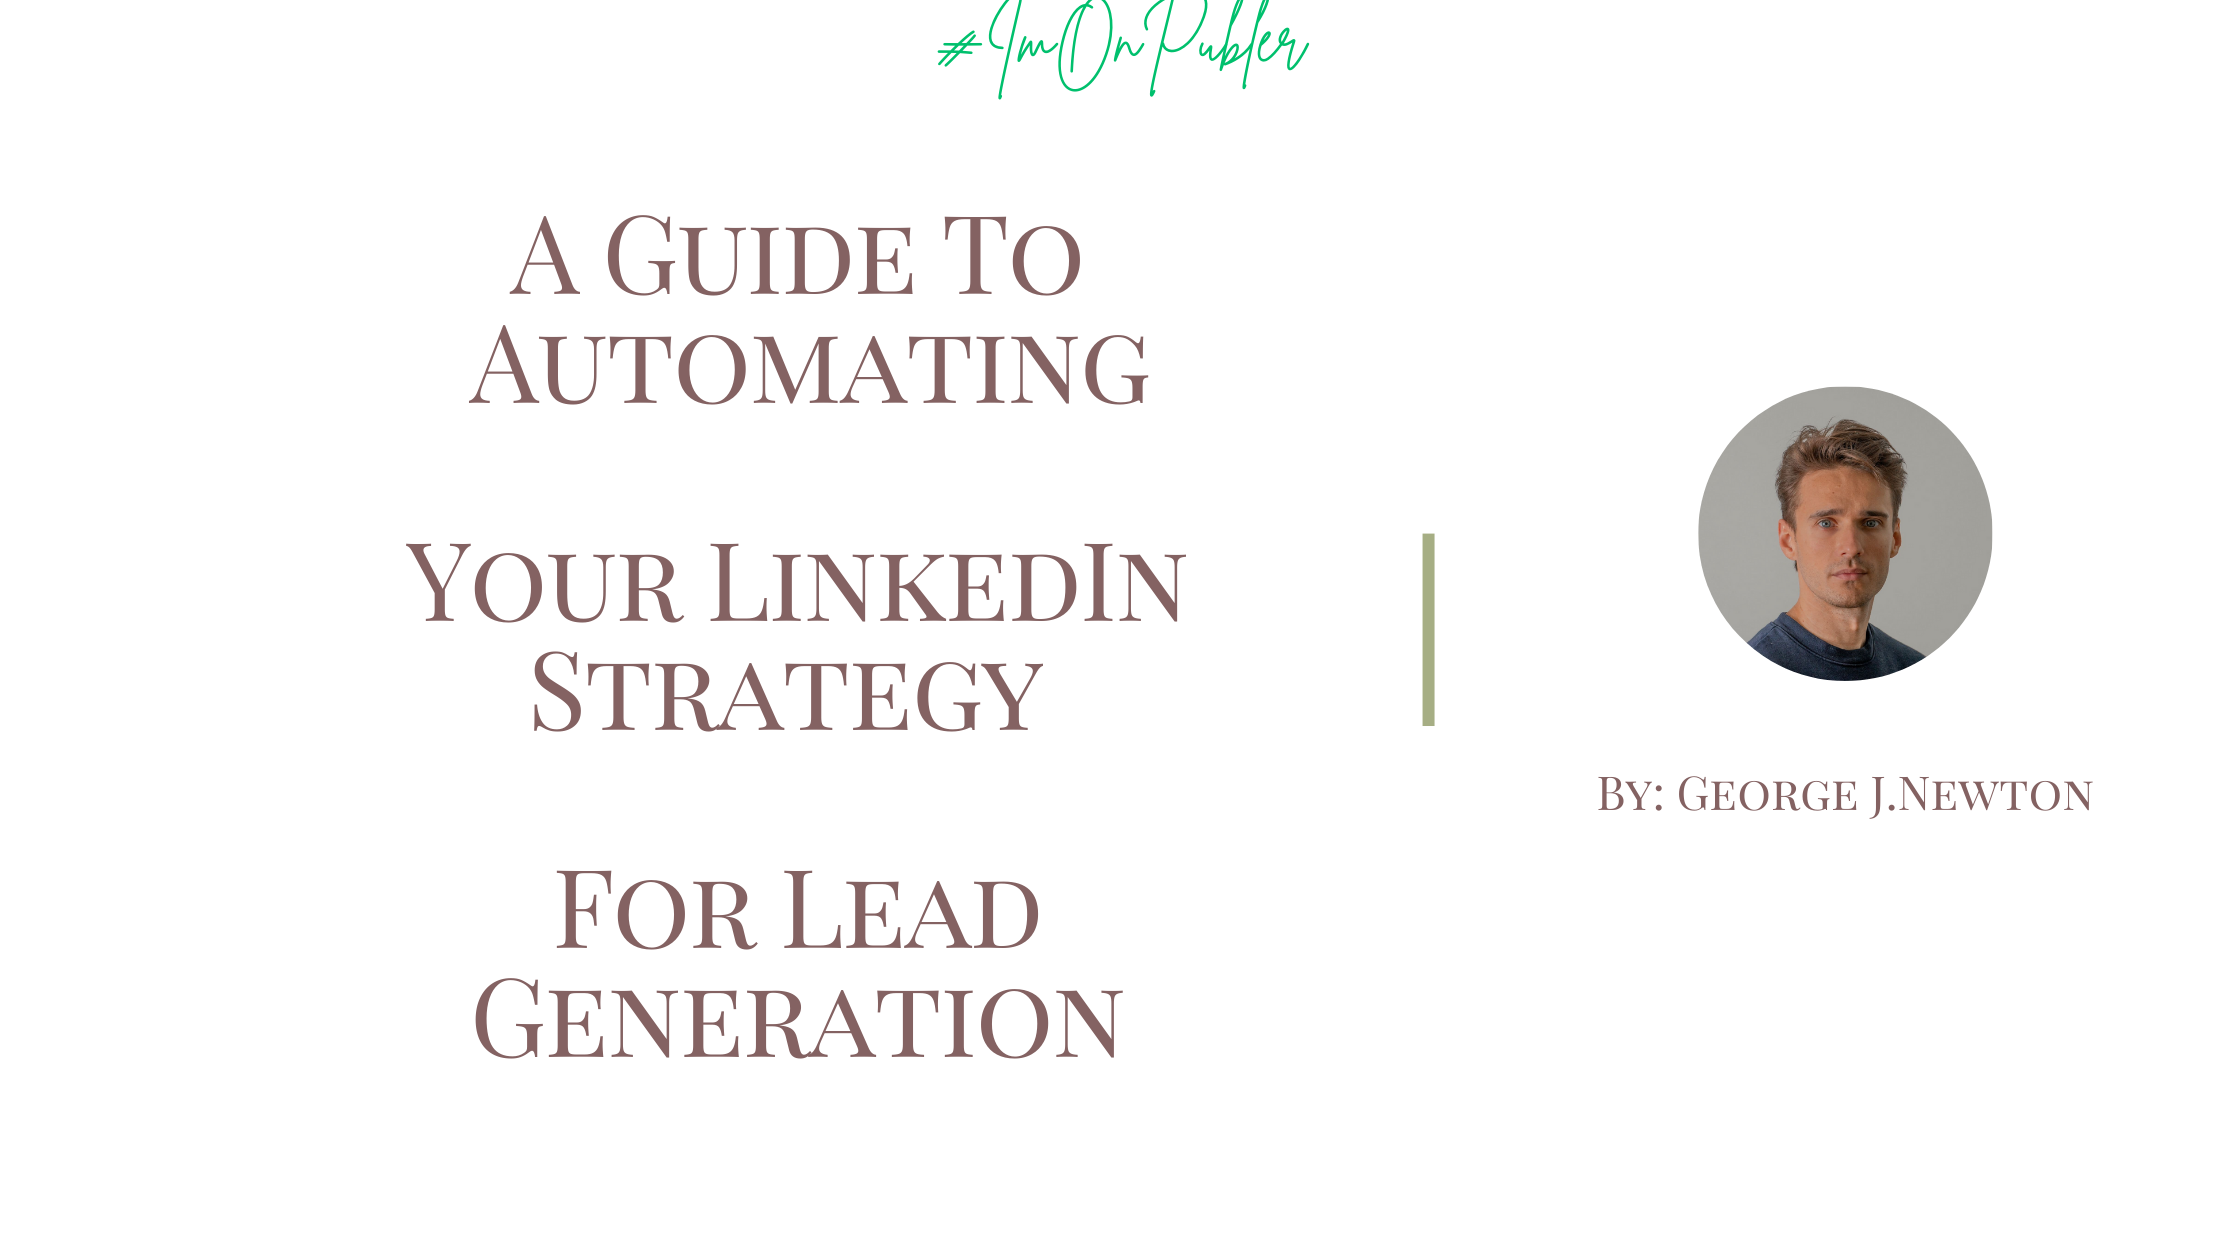 A Guide To Automating Your LinkedIn Strategy For Lead Generation - for publer.io by George J. Newton